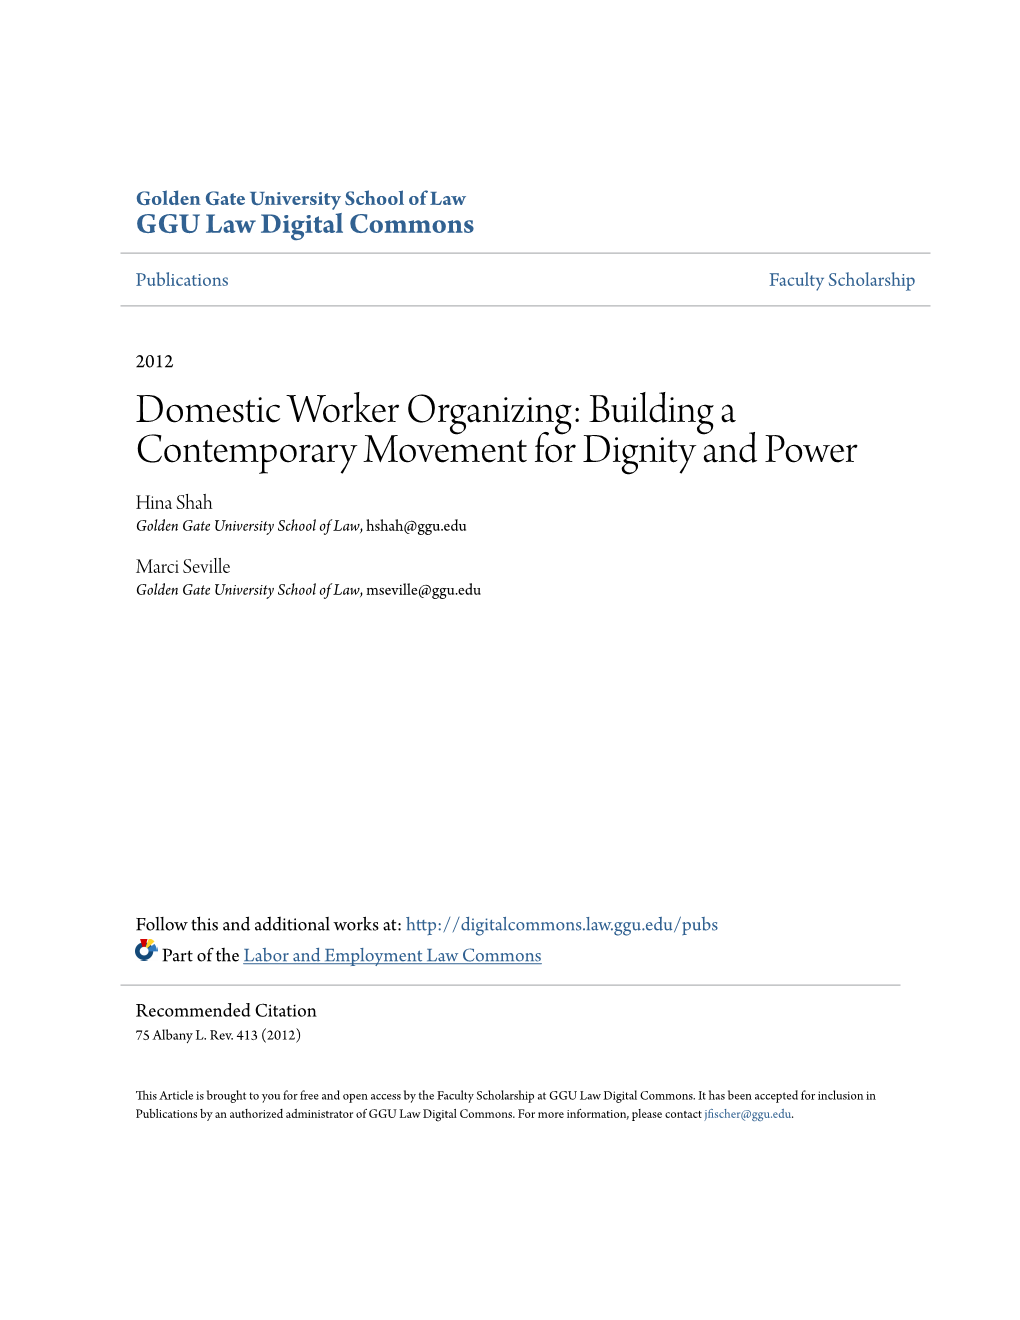 Domestic Worker Organizing: Building a Contemporary Movement for Dignity and Power Hina Shah Golden Gate University School of Law, Hshah@Ggu.Edu